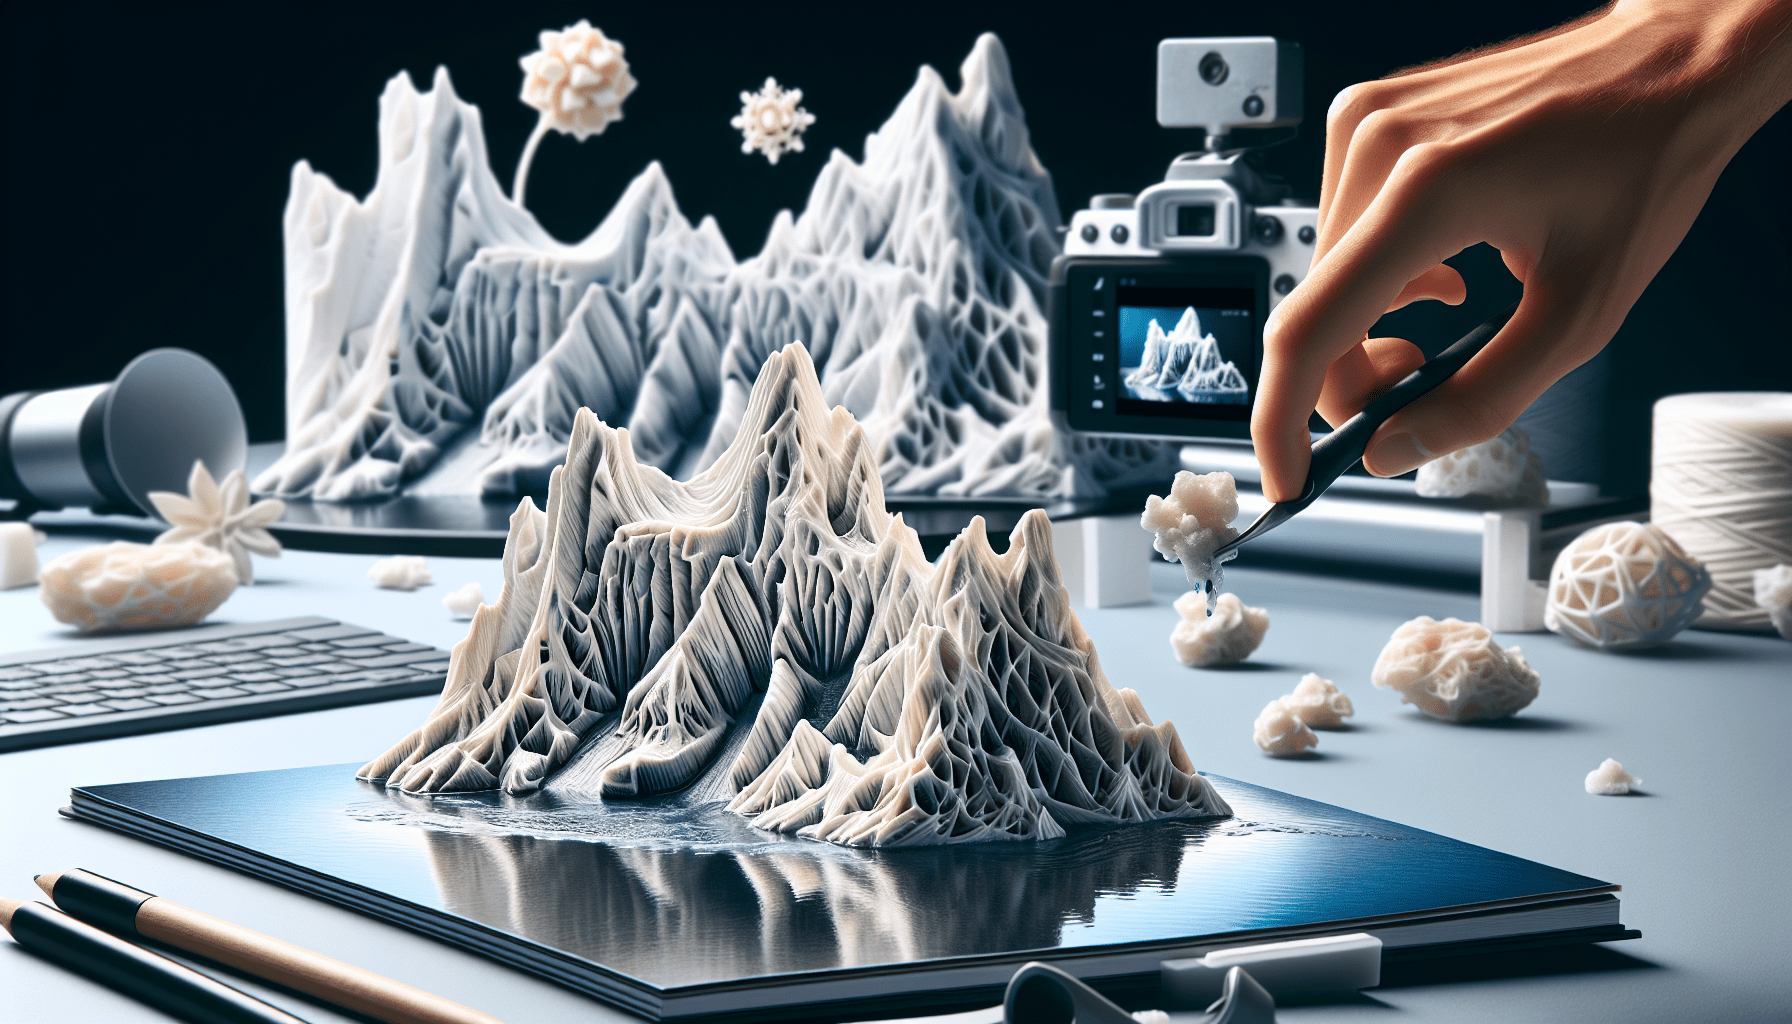 nagami-3d-prints-recycled-plastic-to-mimic-melting-glaciers-in-spanish-boutique-1 Nagami 3D-prints recycled plastic to mimic melting glaciers in Spanish boutique